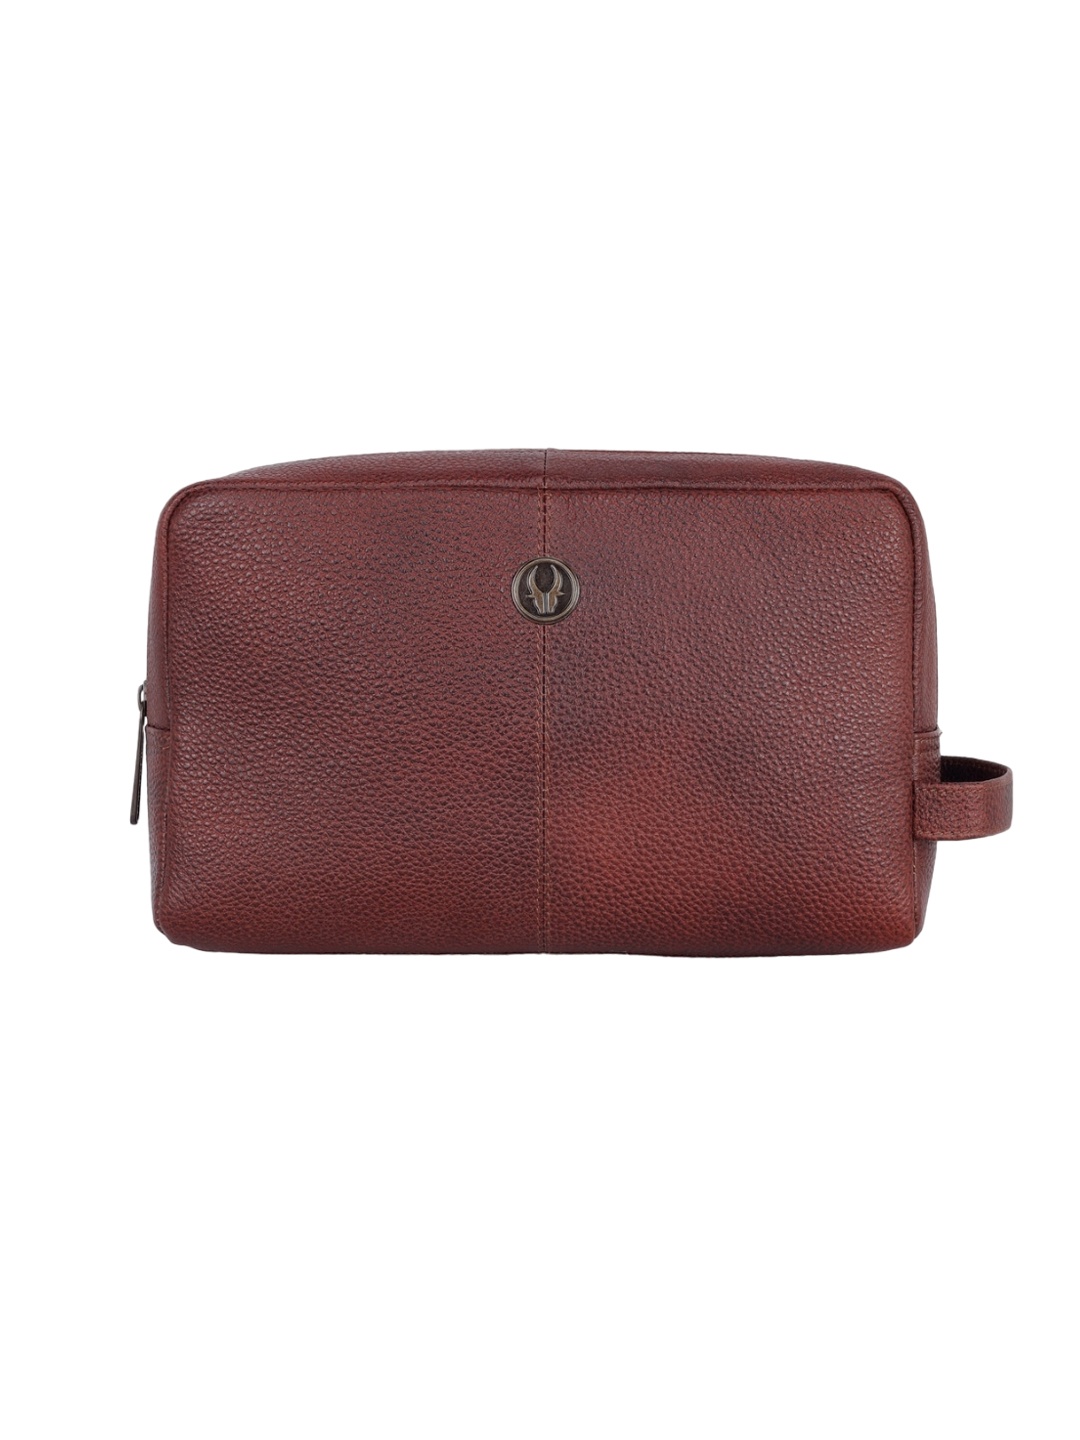 

WildHorn Textured Leather Toiletry Travel Bag, Maroon